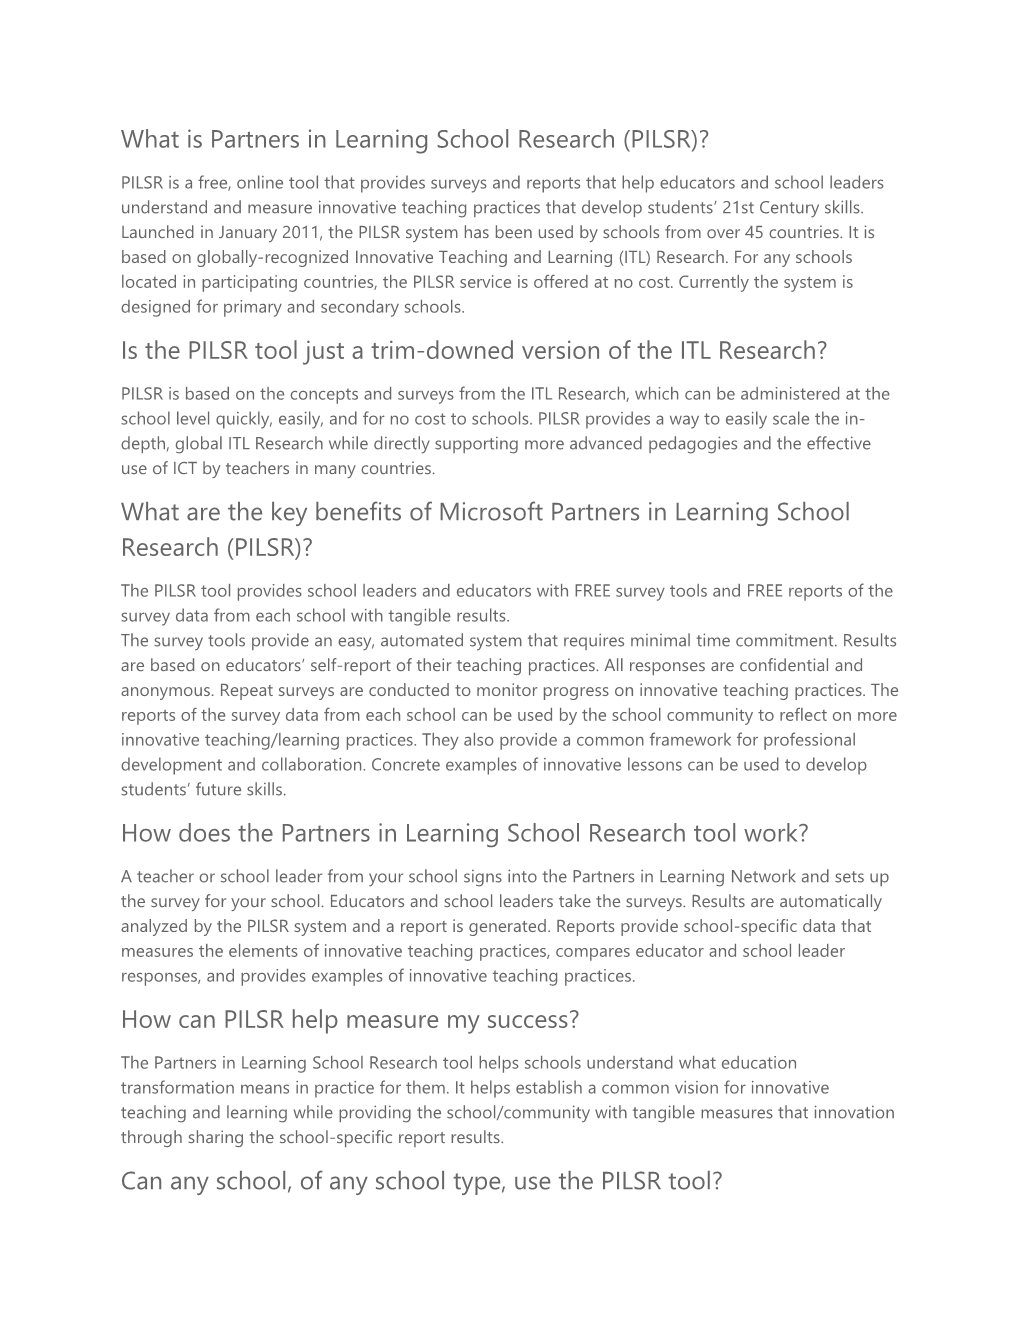 What Is Partners in Learning School Research (PILSR)?